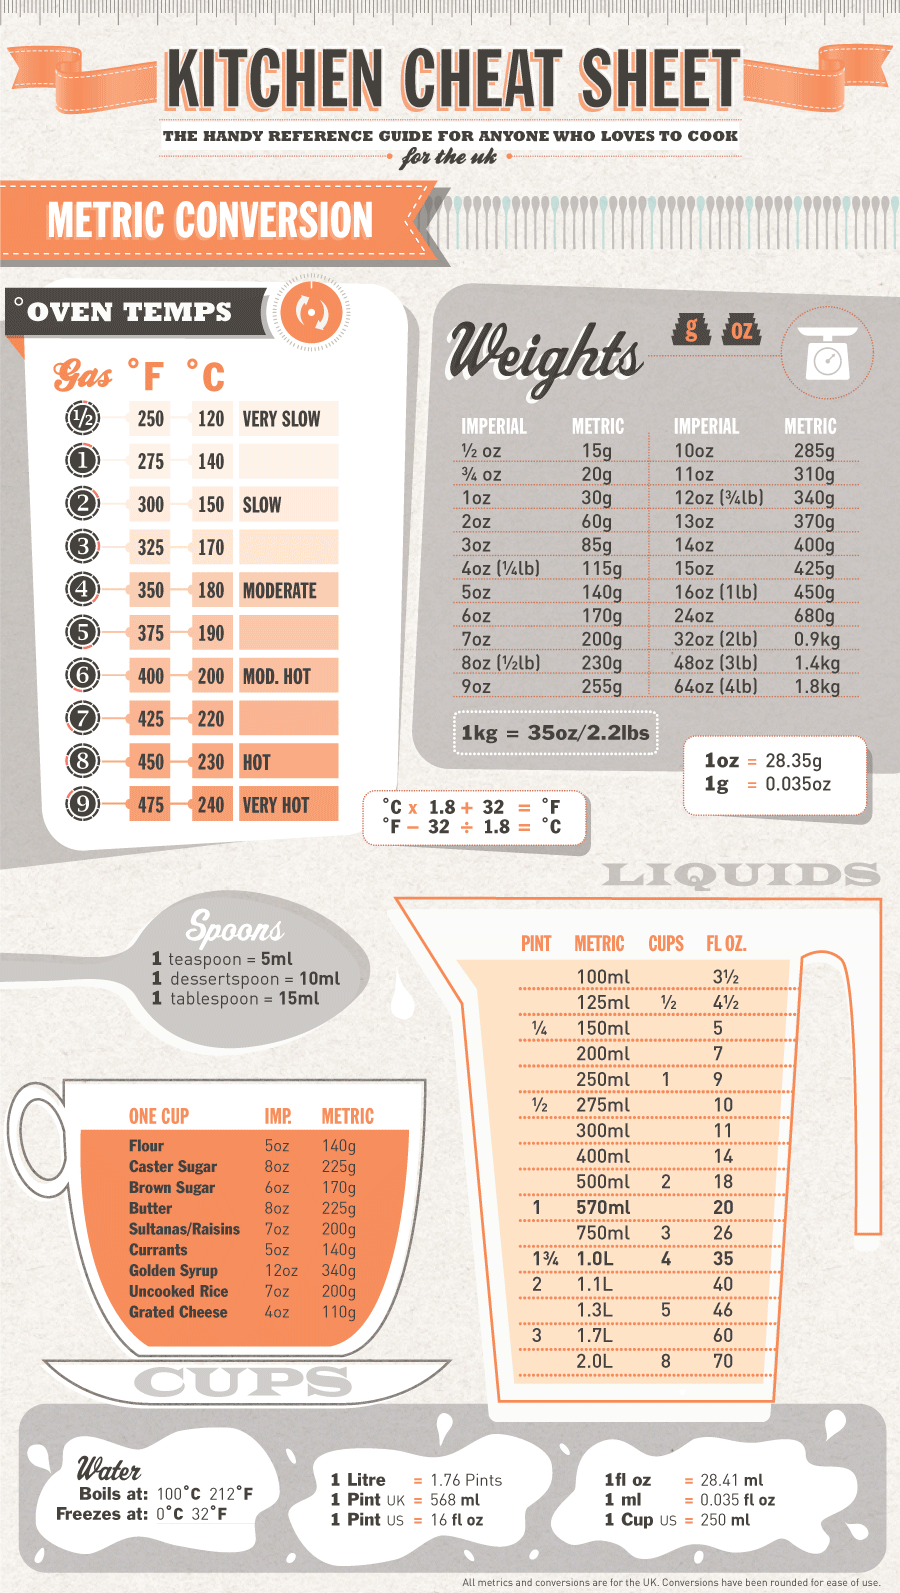 kitchen cheat sheet imperial to metric conversion